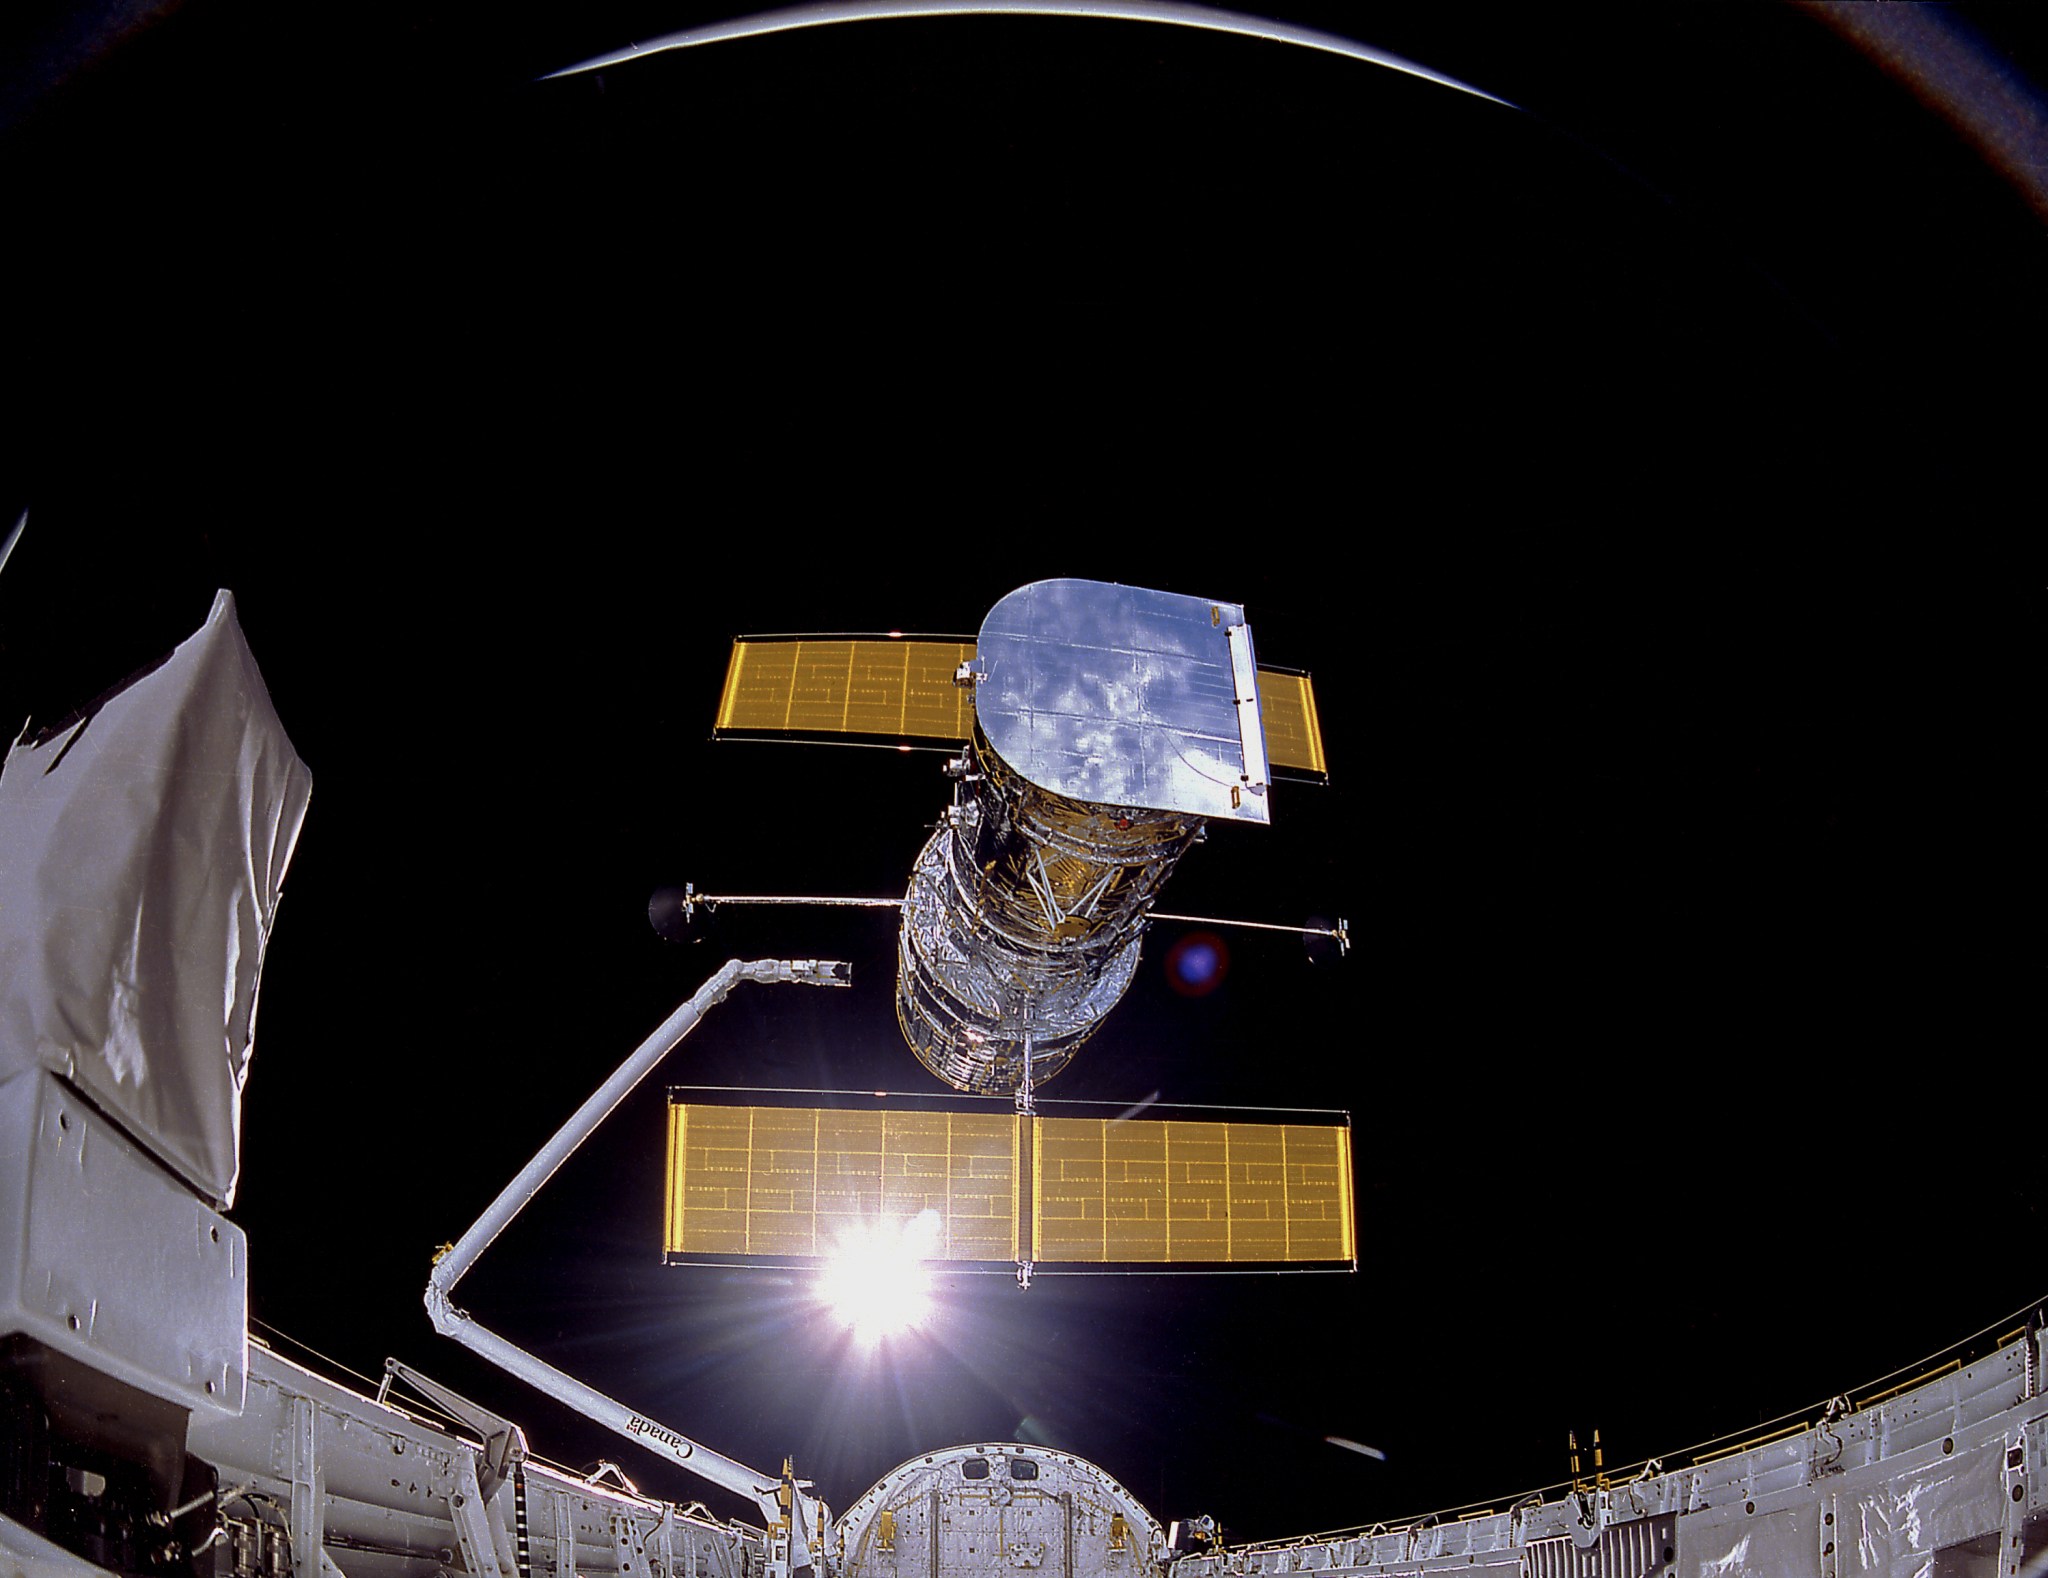 This week in 1990, the Hubble Space Telescope was deployed from space shuttle Discovery during STS-31. 